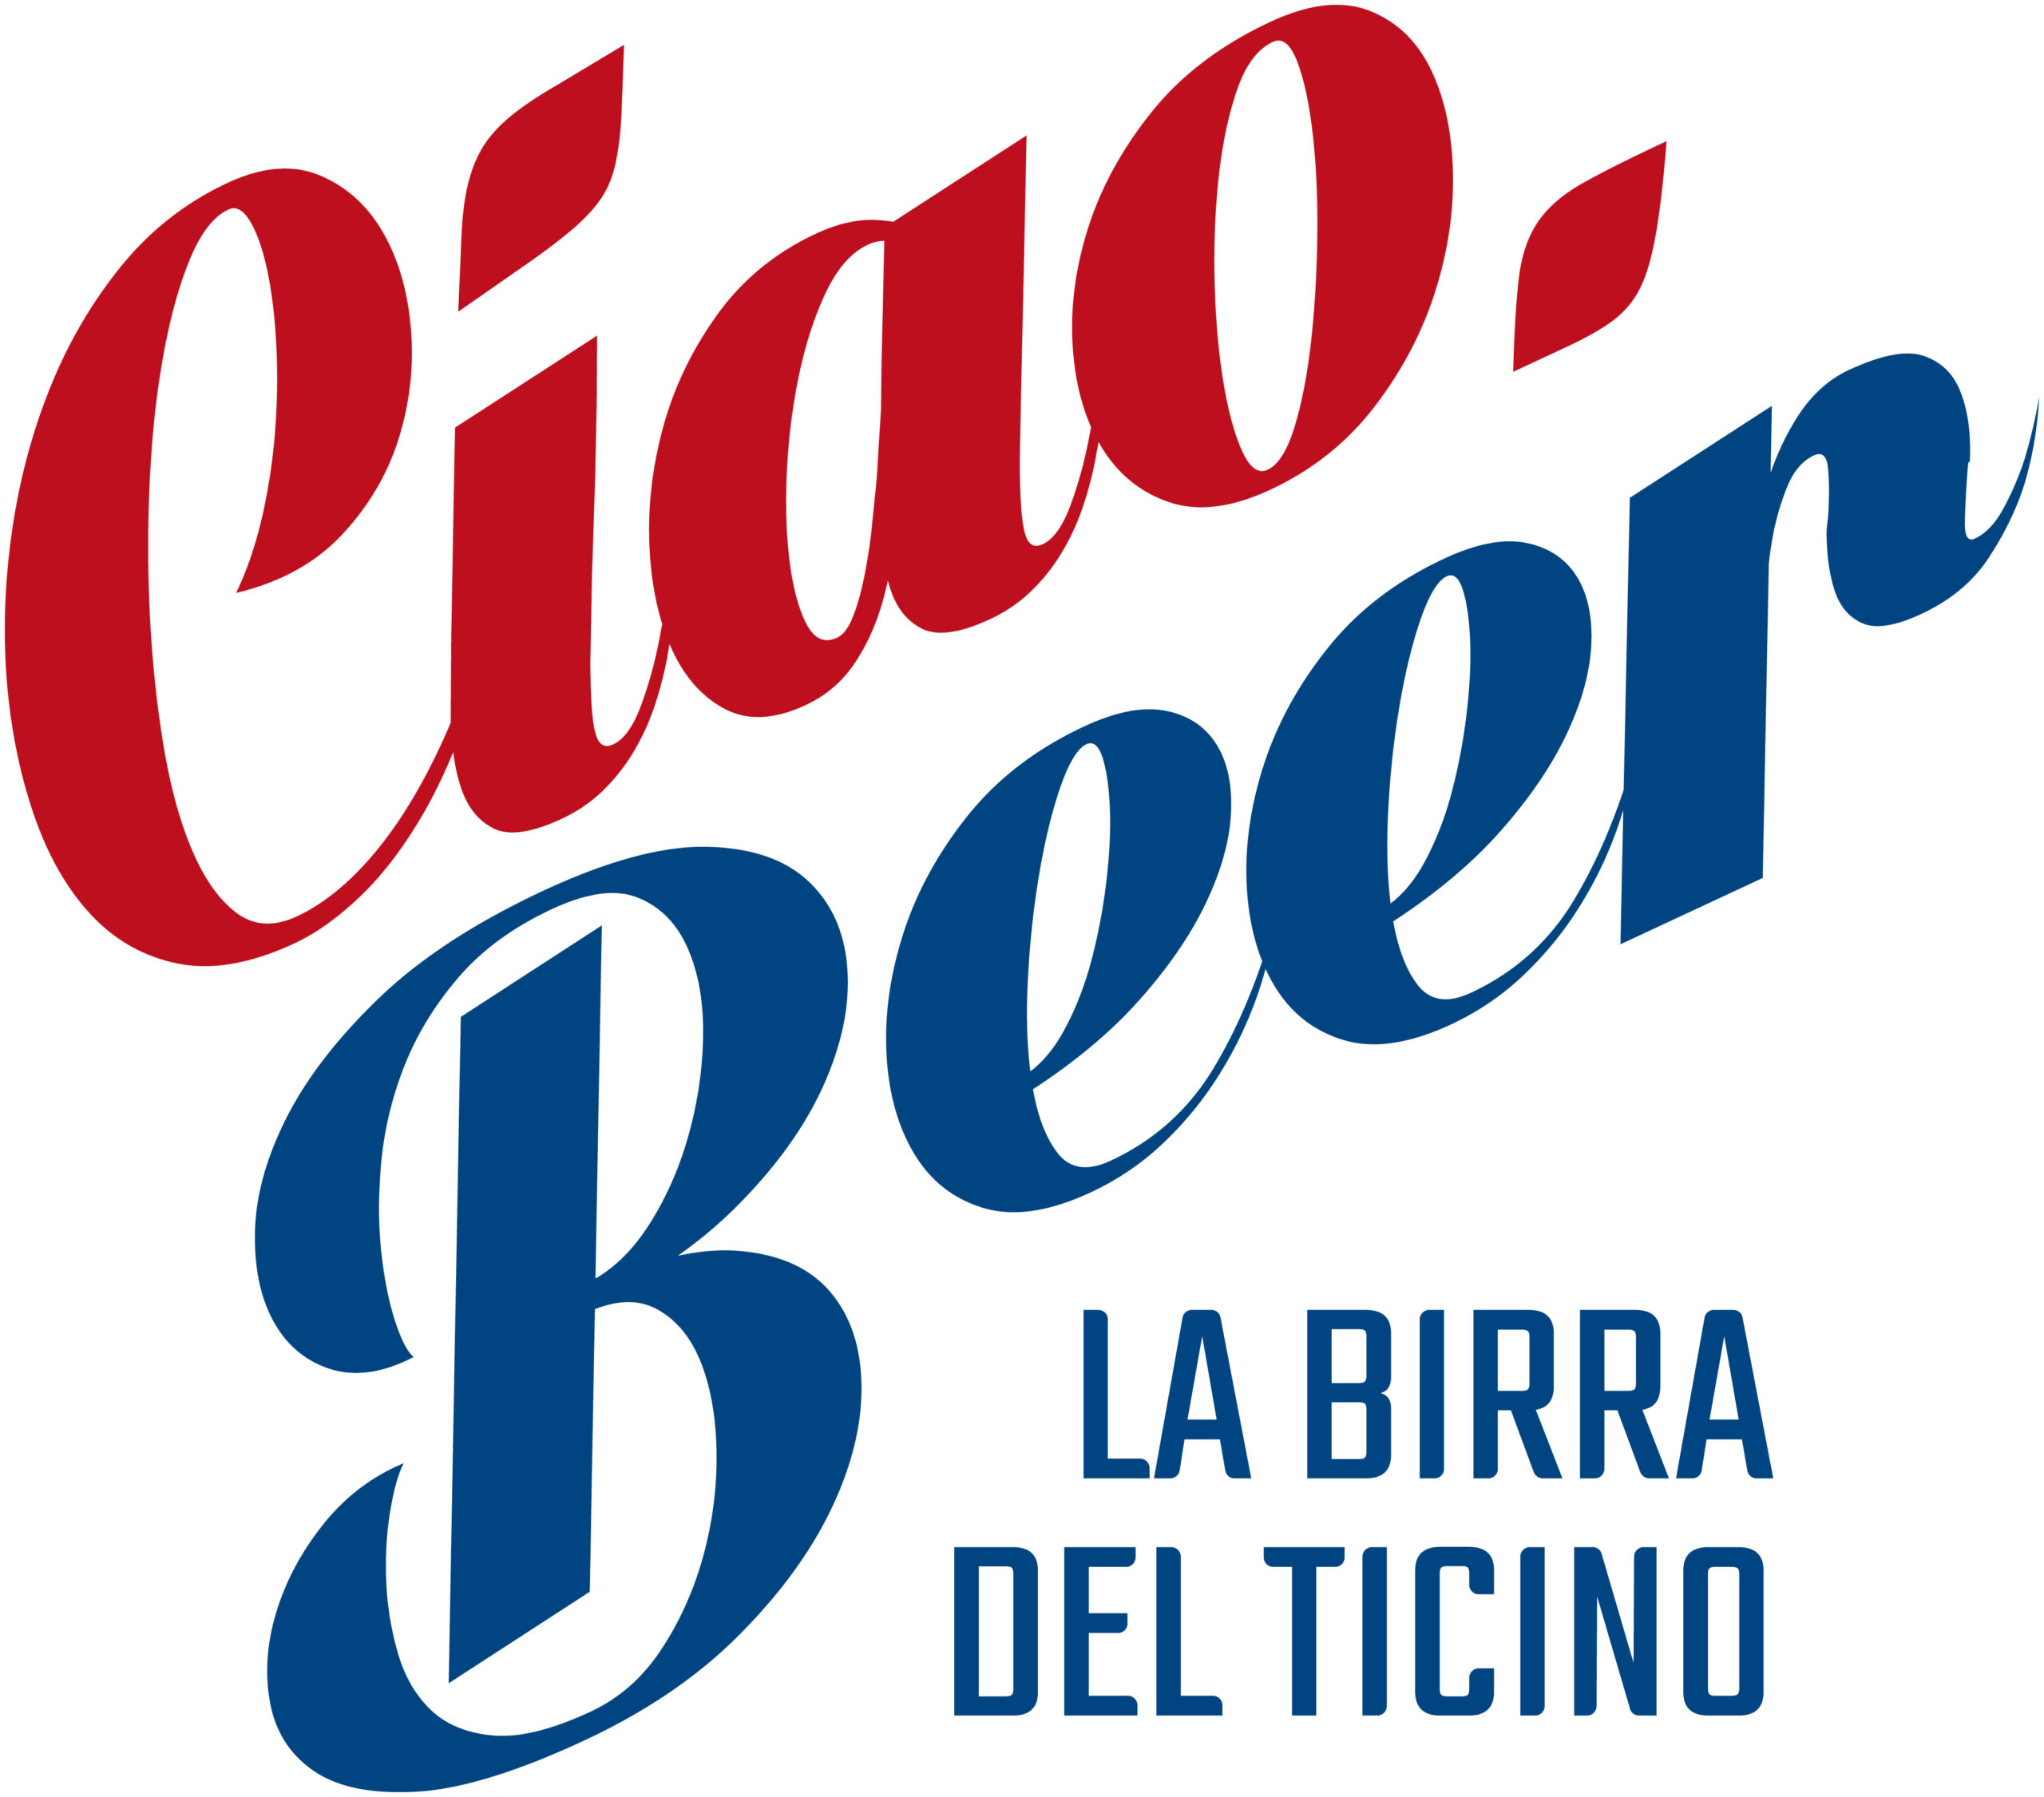 Ciao. Beer